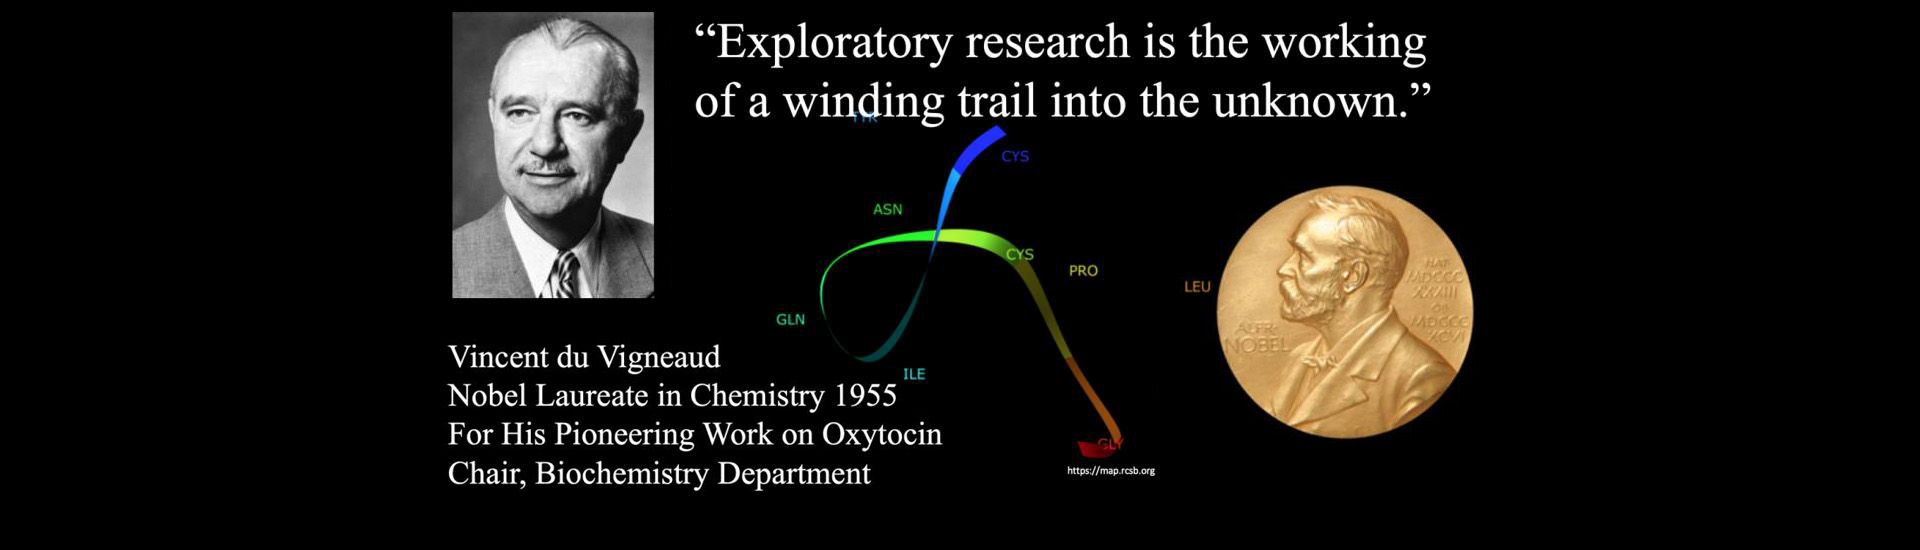 "exploring research is the working of a winding trail into the unknown" Vincent du Vigneaud, Nobel Laureate in Chemistry 1995 for his pioneering work on oxytocin, chair of the gw biochemistry dept.